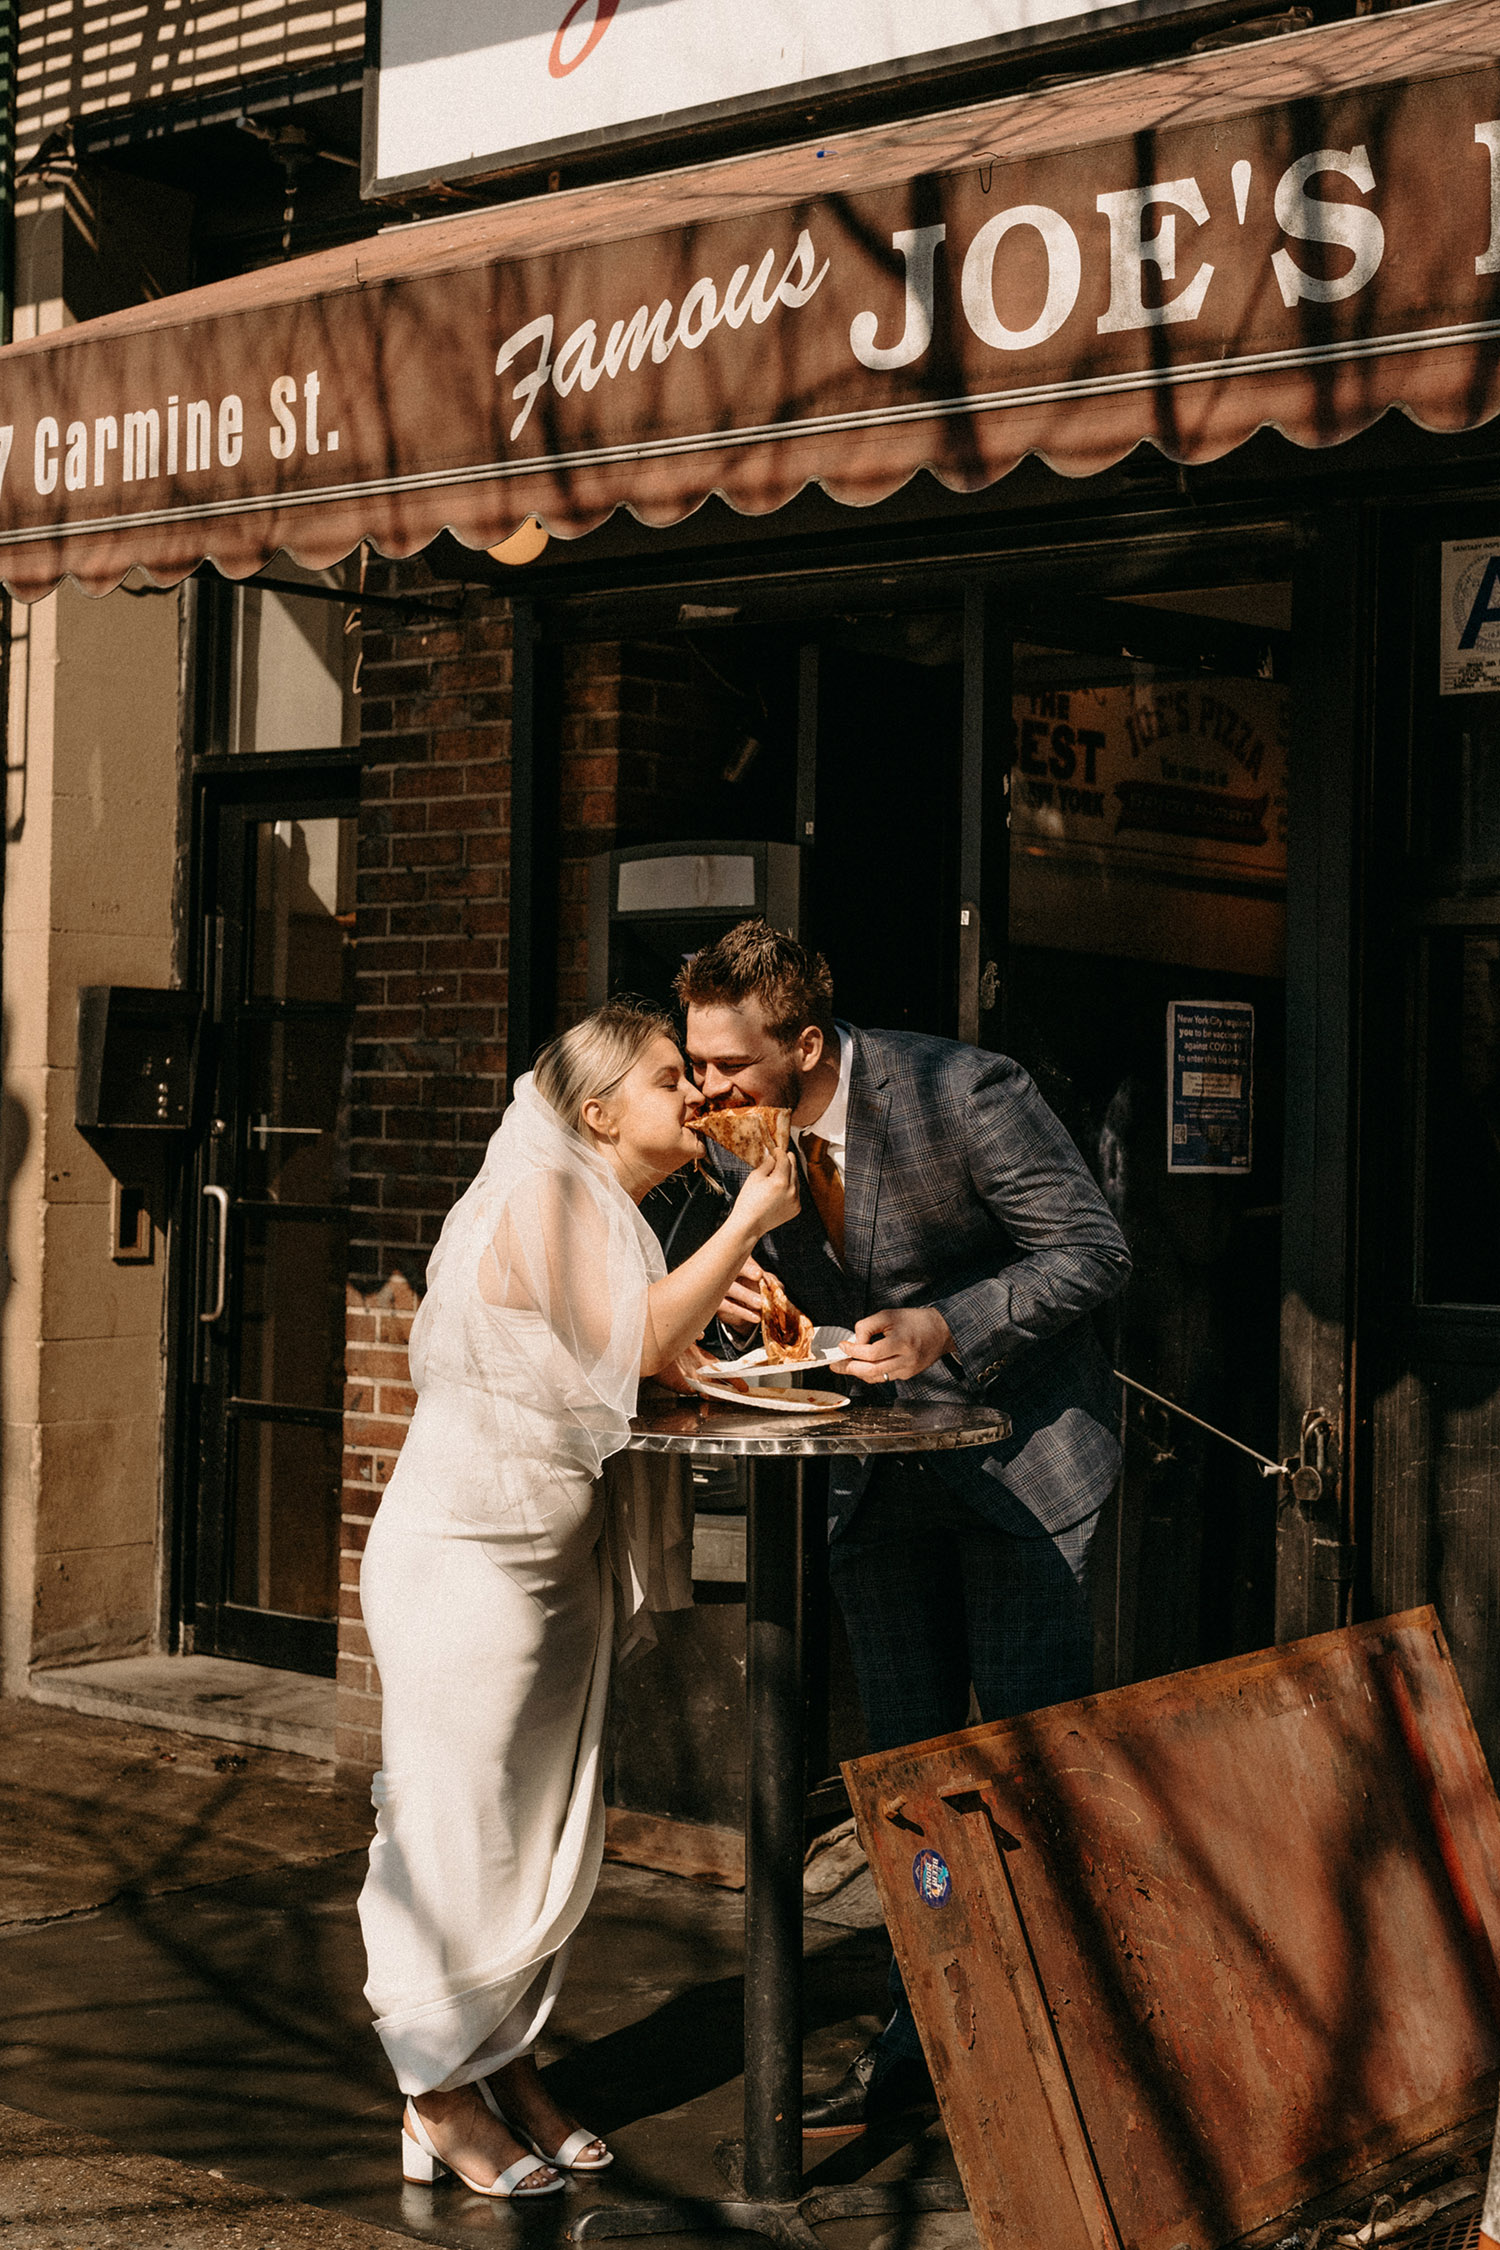 Couple sharing pizza together on their elopement day in West Village New York City